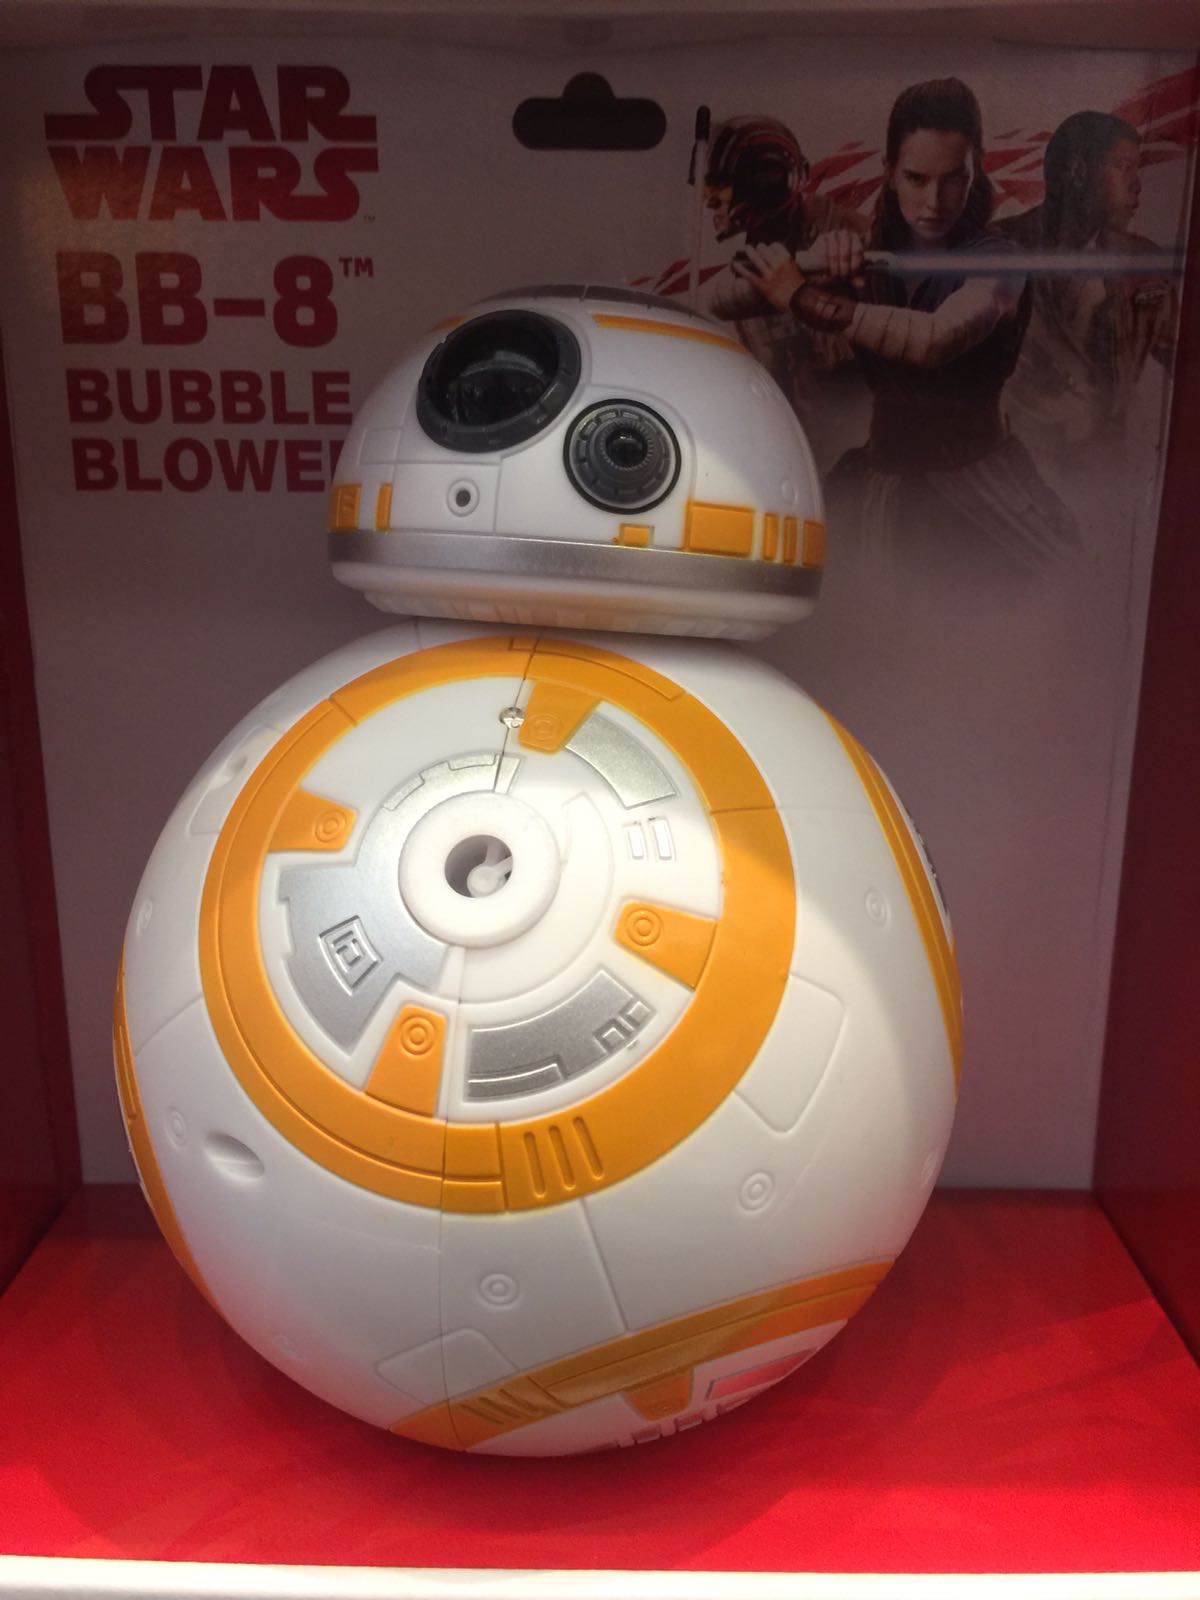 Disney Parks Star Wars BB-8 Bubble Blower New with Box